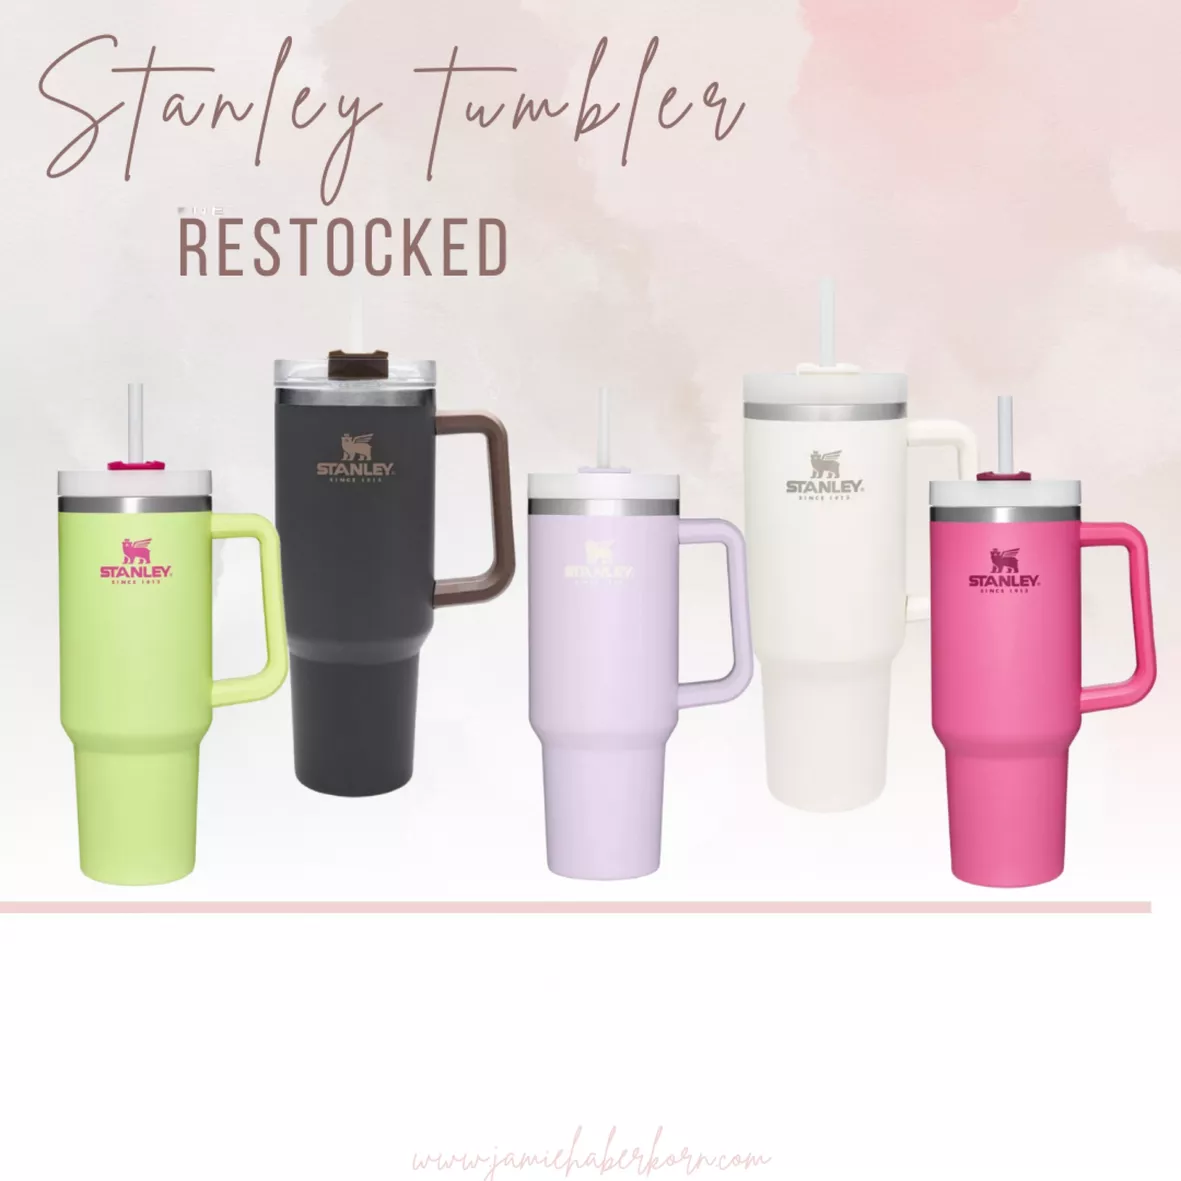 Wholesale commodity This Stanley Adventure Quencher Restock Includes New  Spring Colors, stanley wuencher